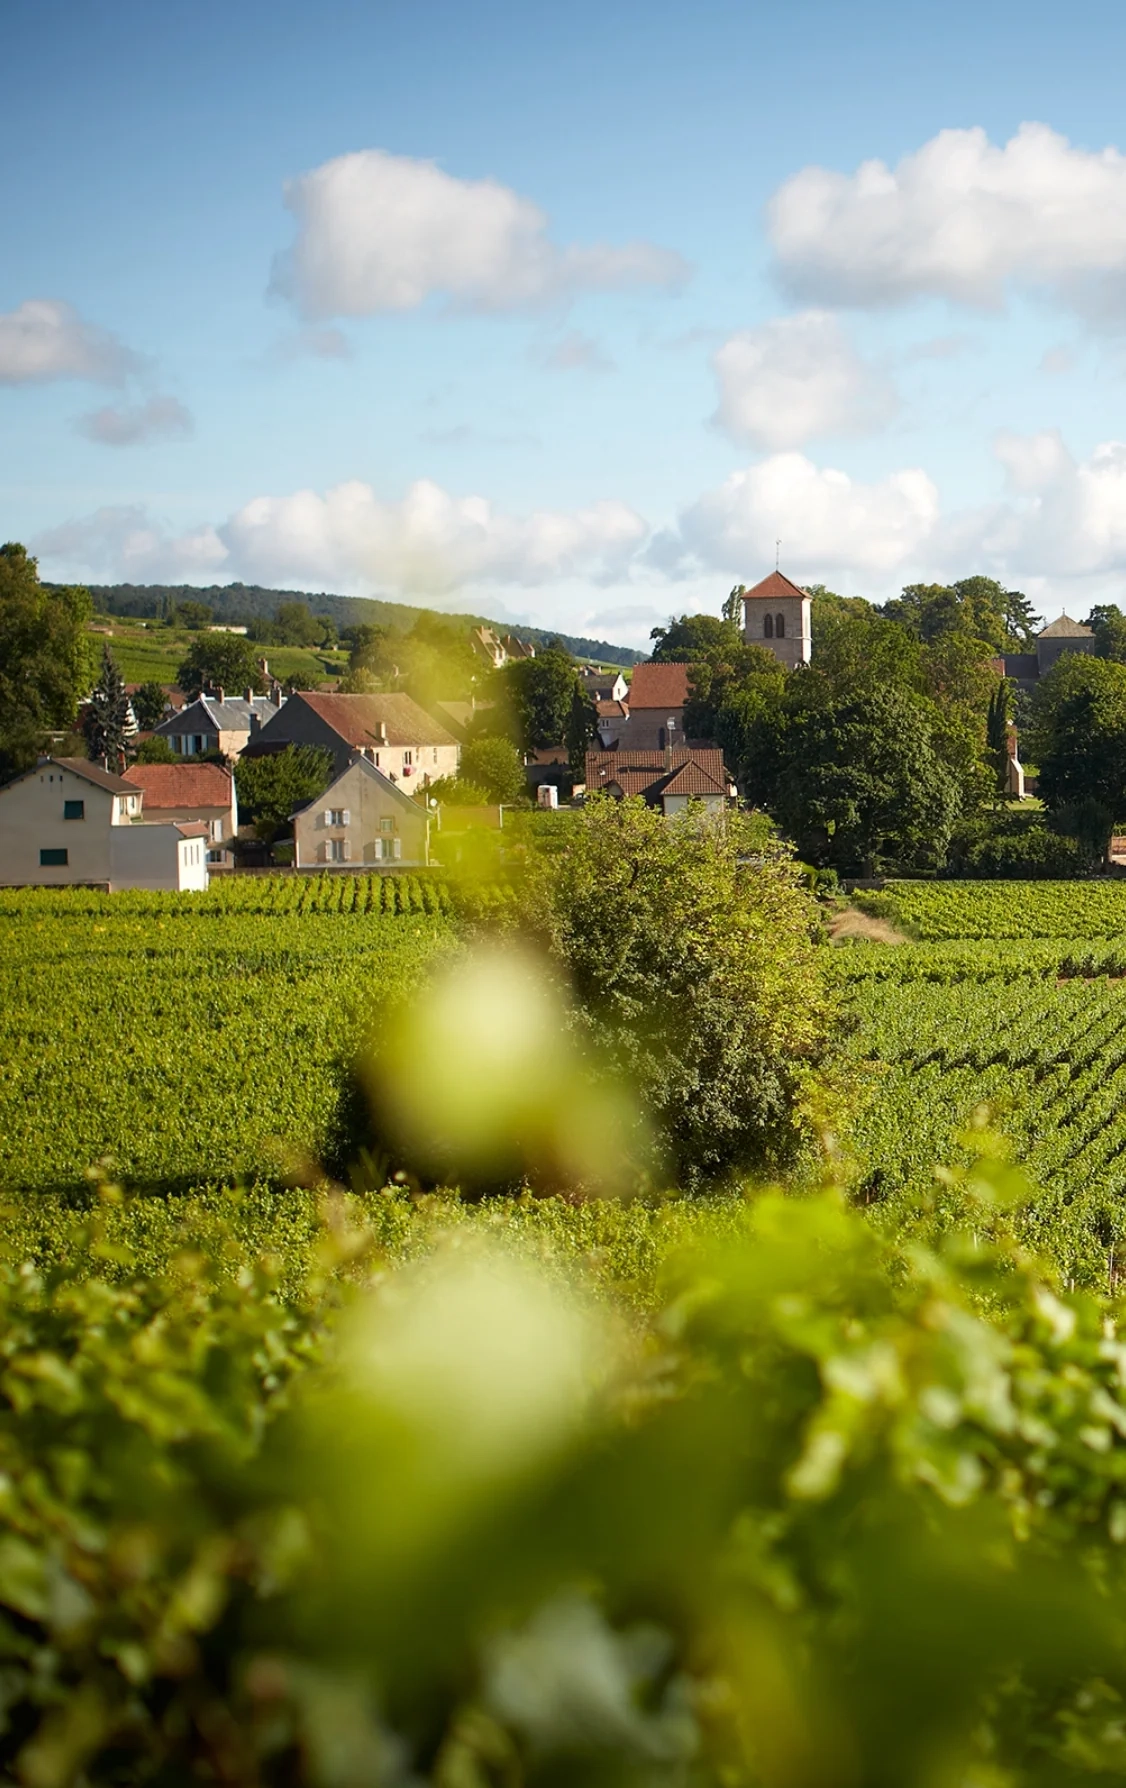 Nestled in the heart
Of the old village
Of Gevrey-Chambertin